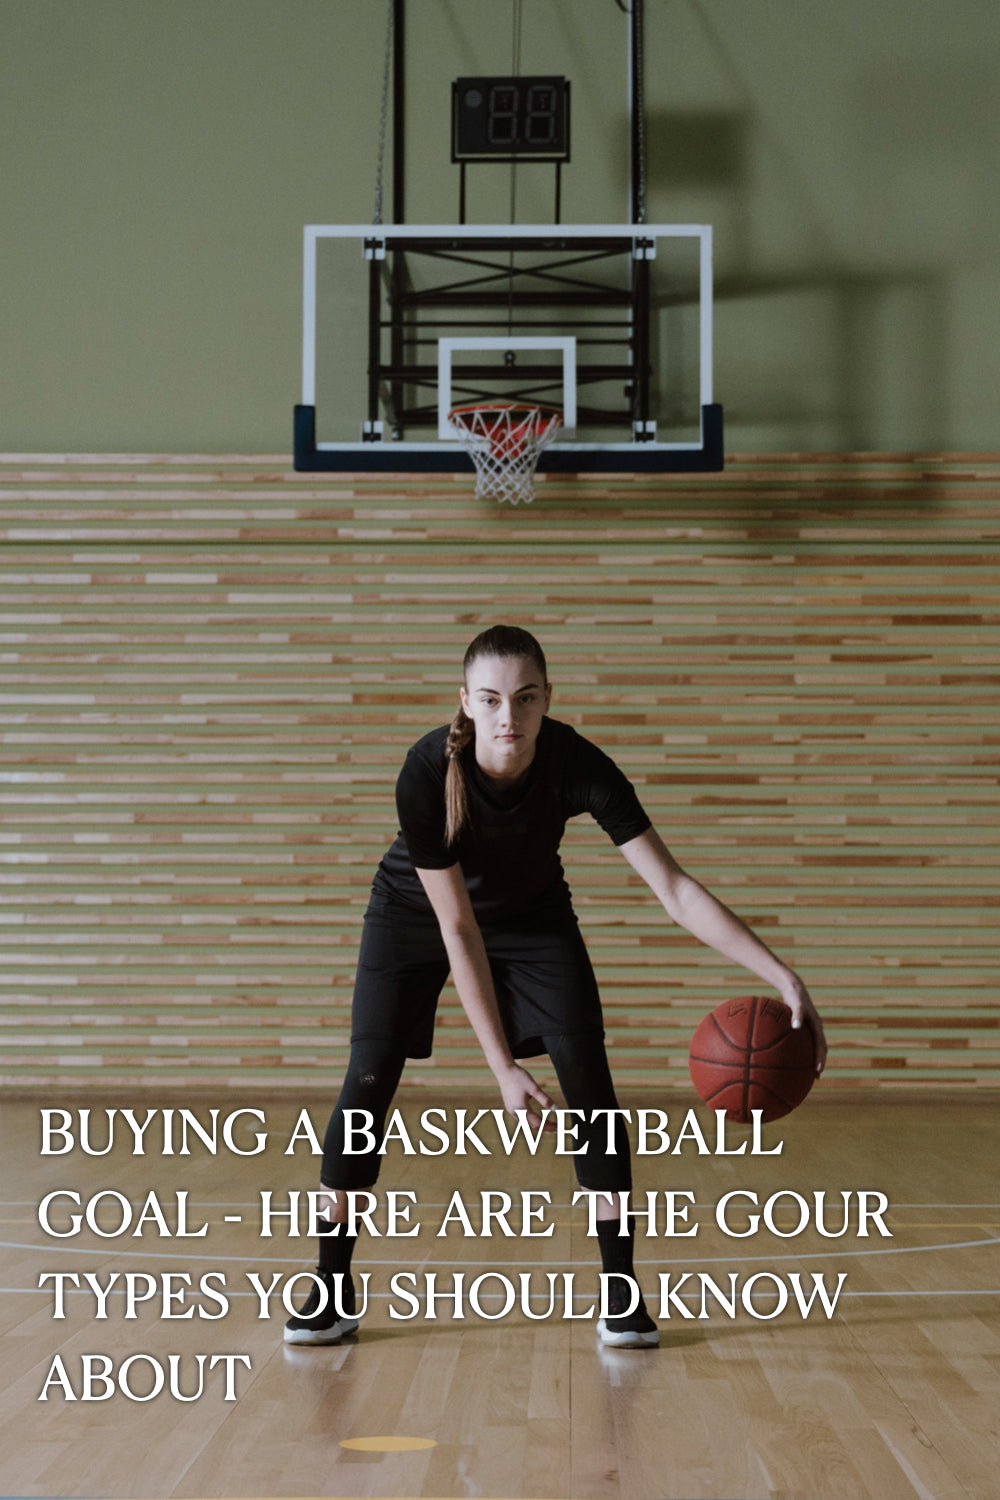 BUYING A BASKETBALL HOOP - HERE ARE THE 4 TYPES YOU NEED TO KNOW